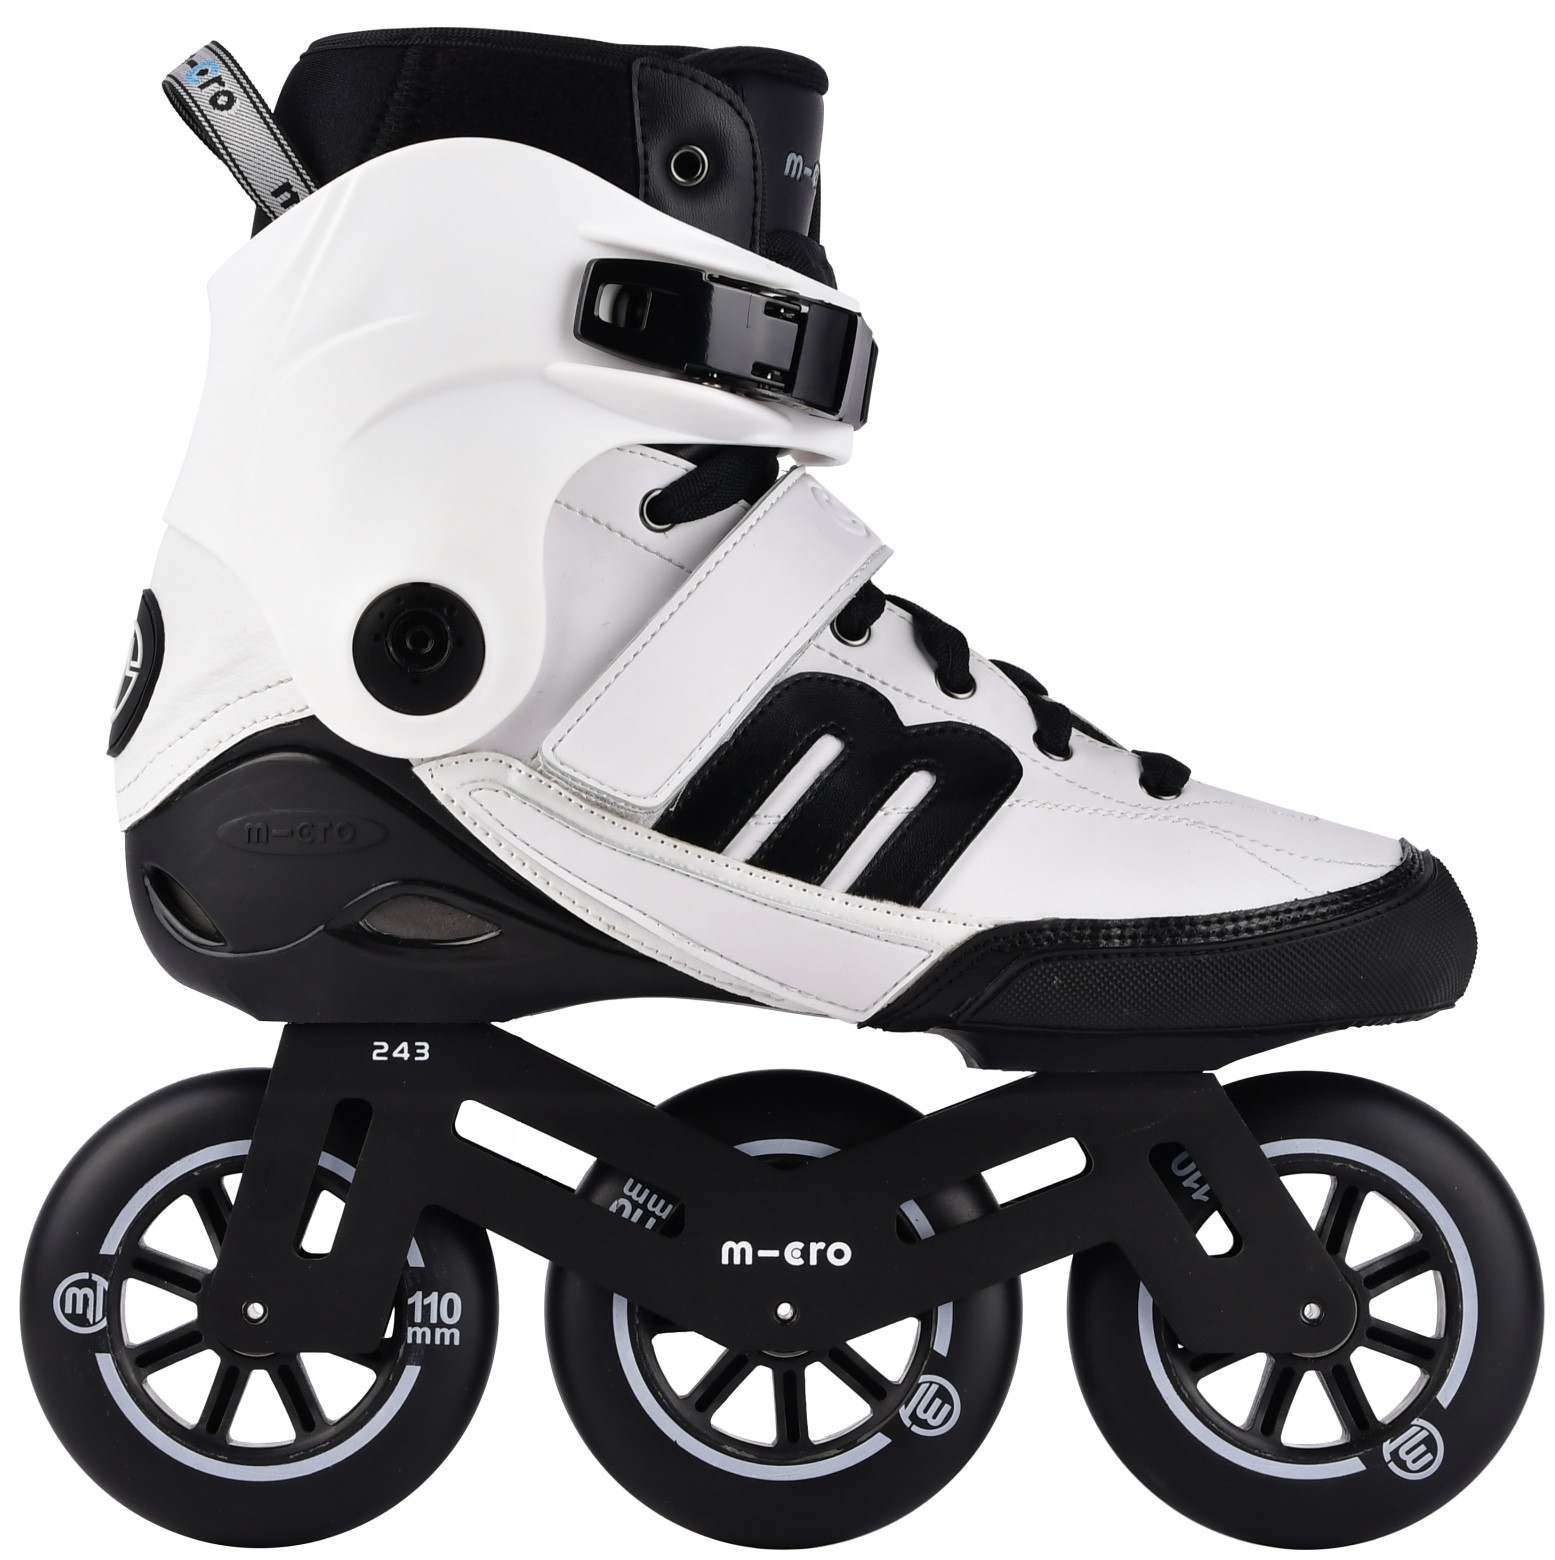 Micro white BEAT inline skate for urban use in side view